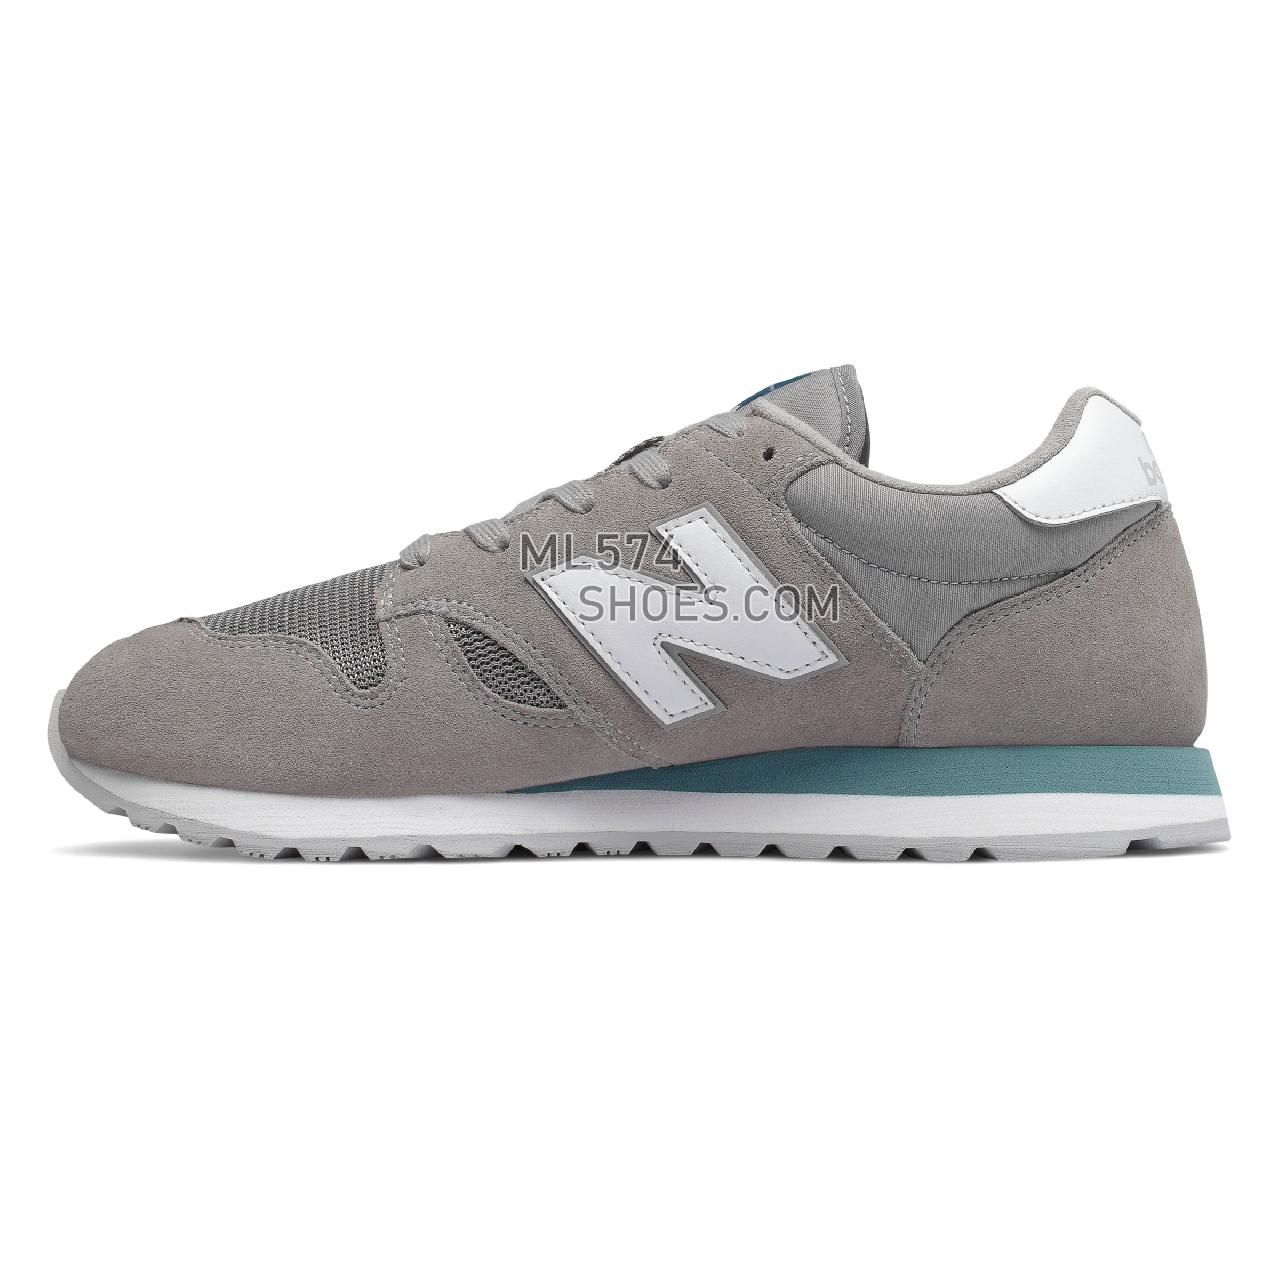 New Balance 520 - Men's Classic Sneakers - Steel with White - U520GH